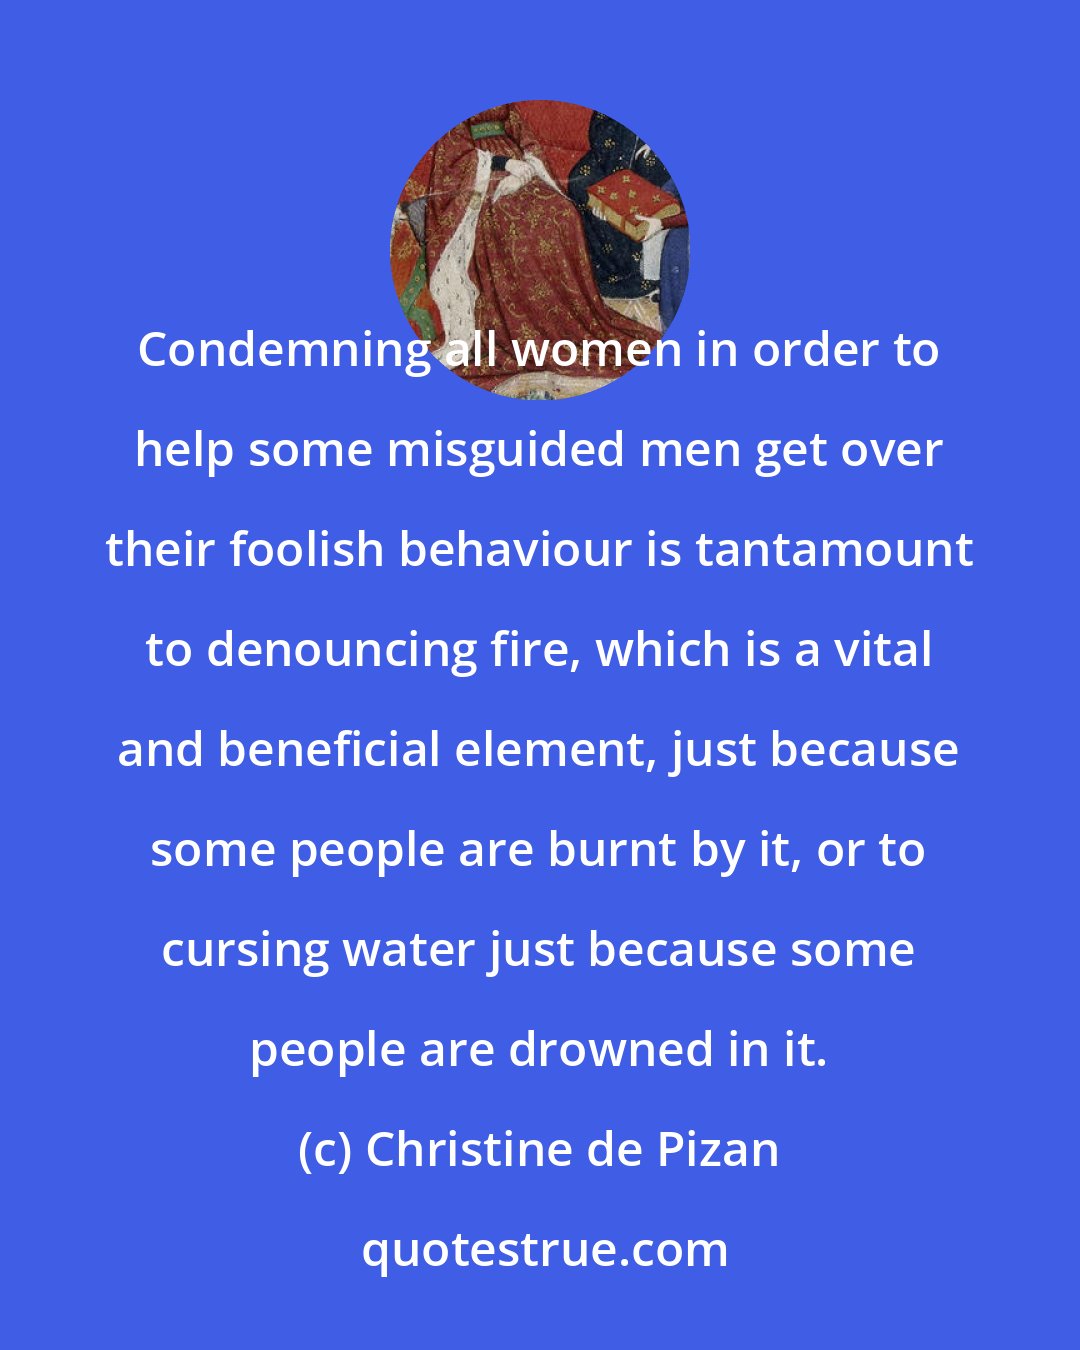 Christine de Pizan: Condemning all women in order to help some misguided men get over their foolish behaviour is tantamount to denouncing fire, which is a vital and beneficial element, just because some people are burnt by it, or to cursing water just because some people are drowned in it.